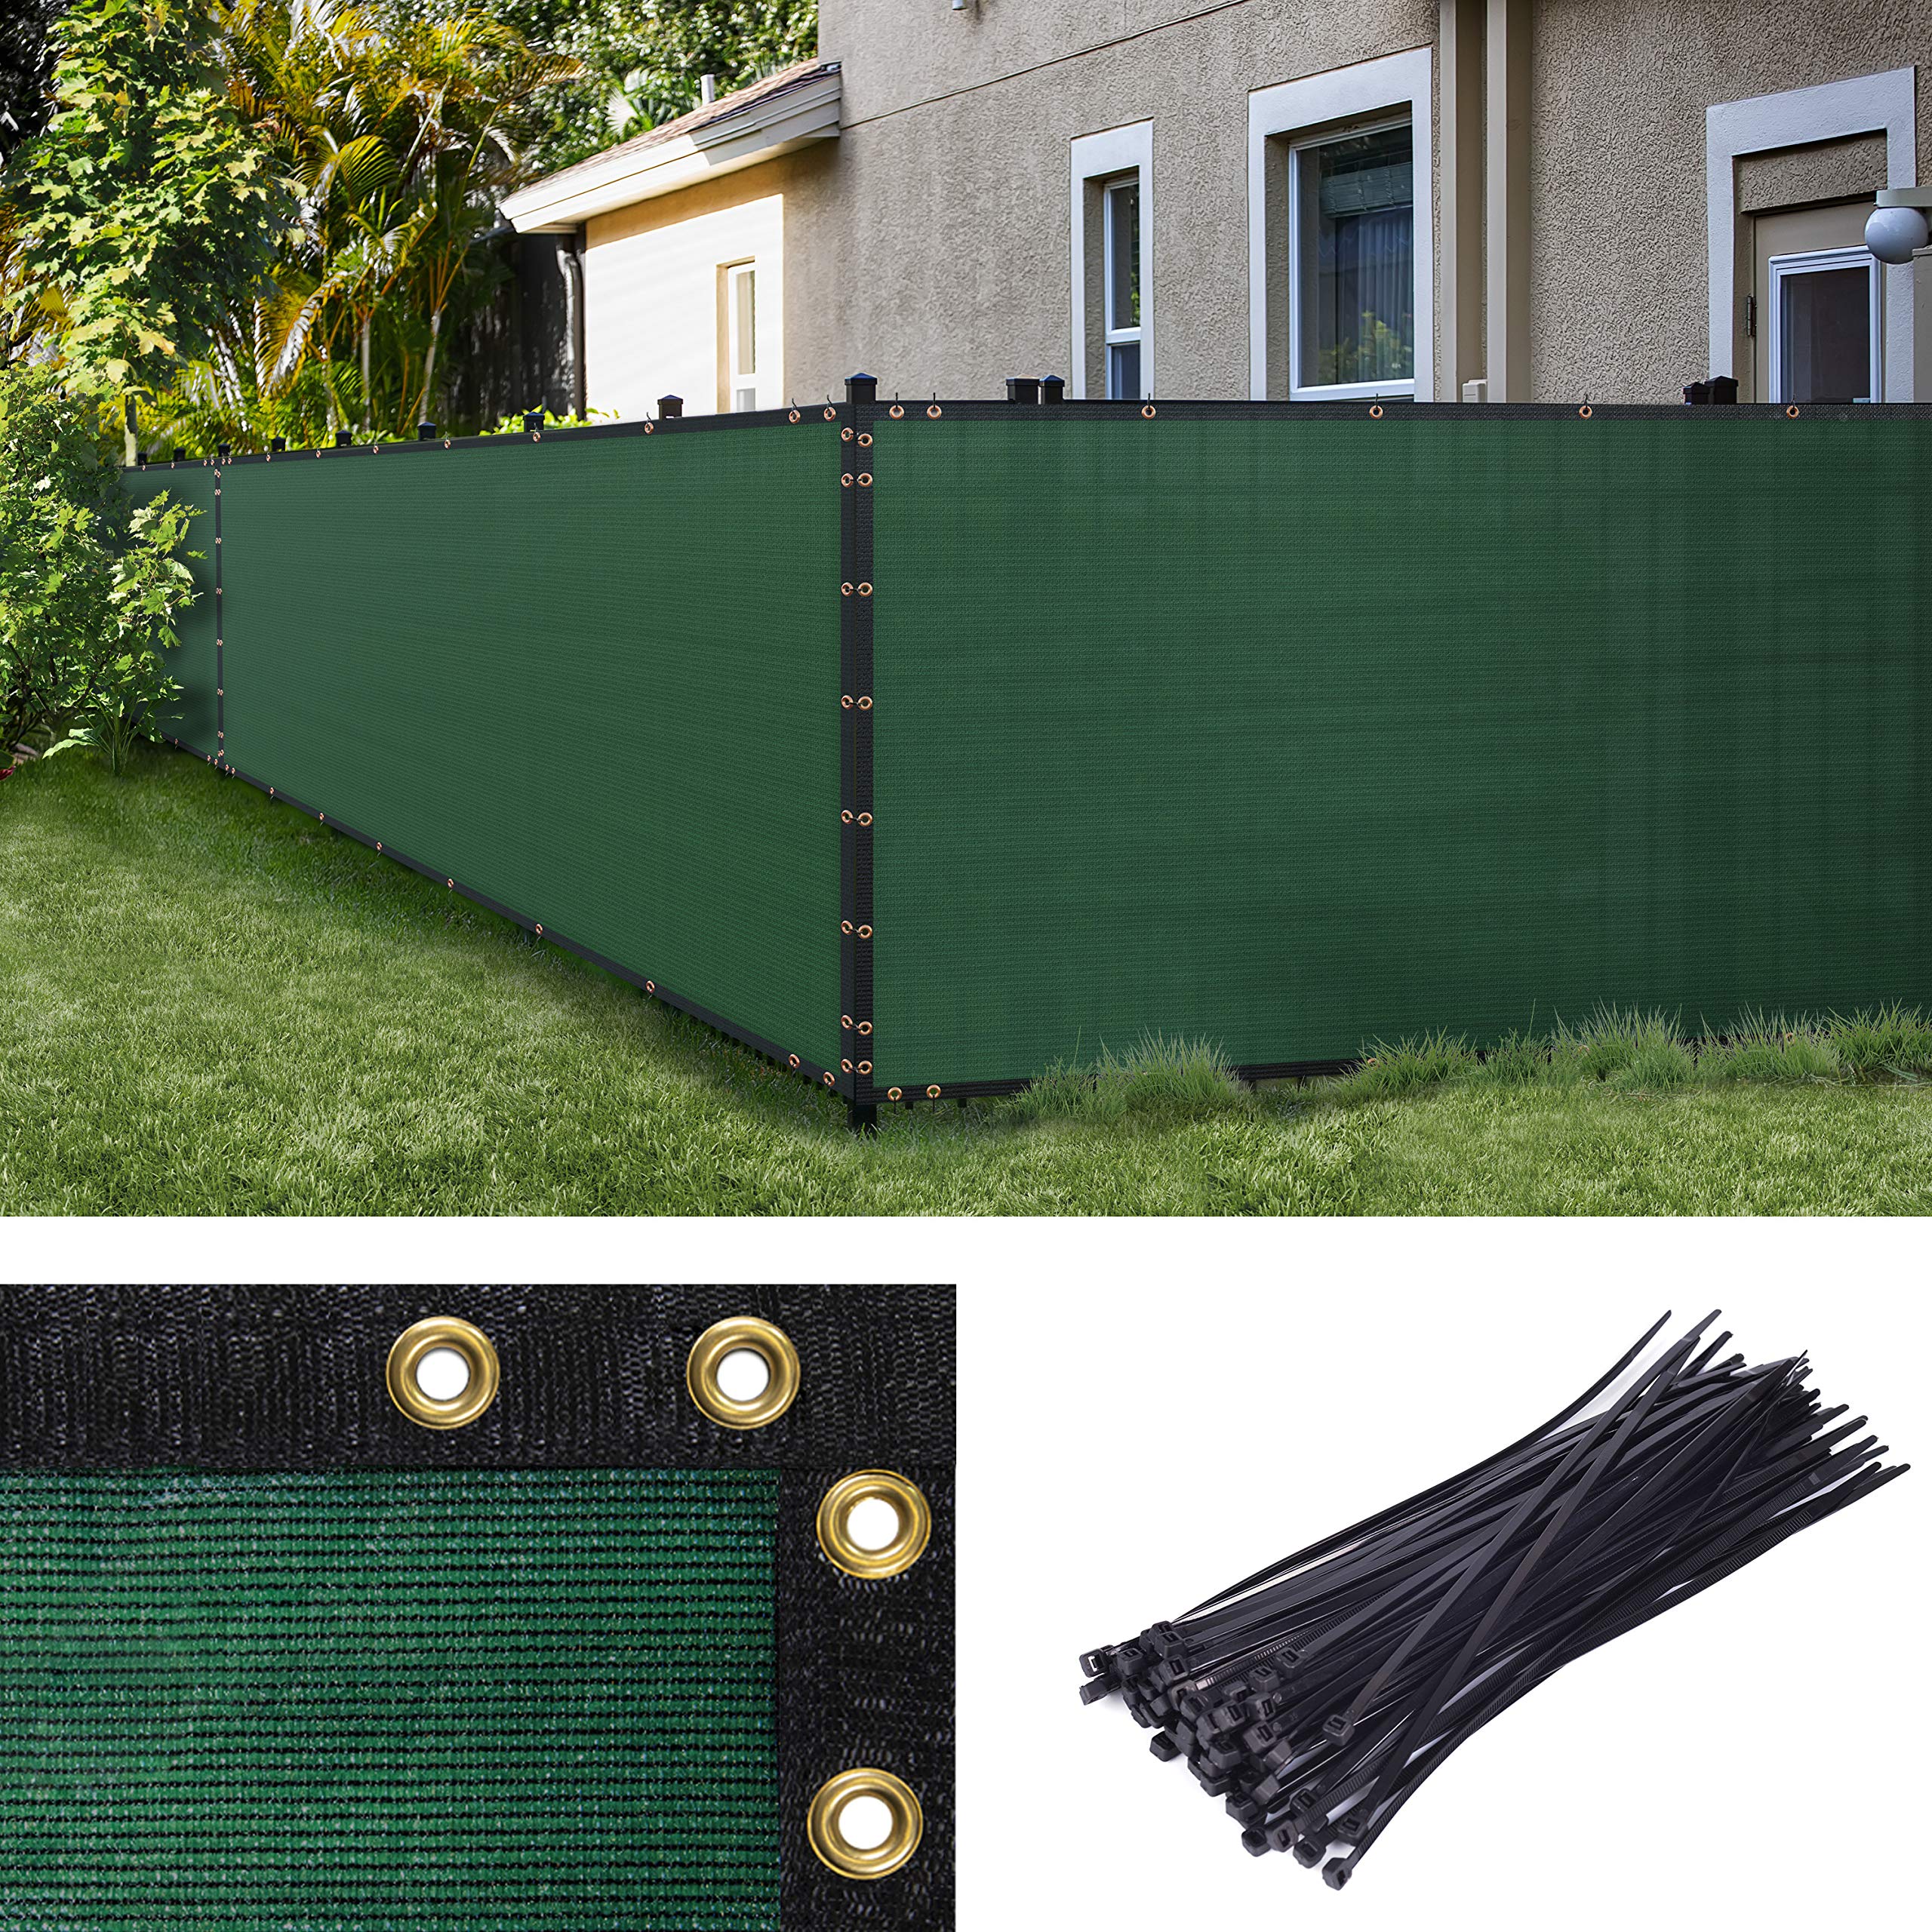 Amgo custom Made 4 x 70 custom Size green Fence Privacy Screen Windscreen,with Bindings & grommets Heavy Duty commercial